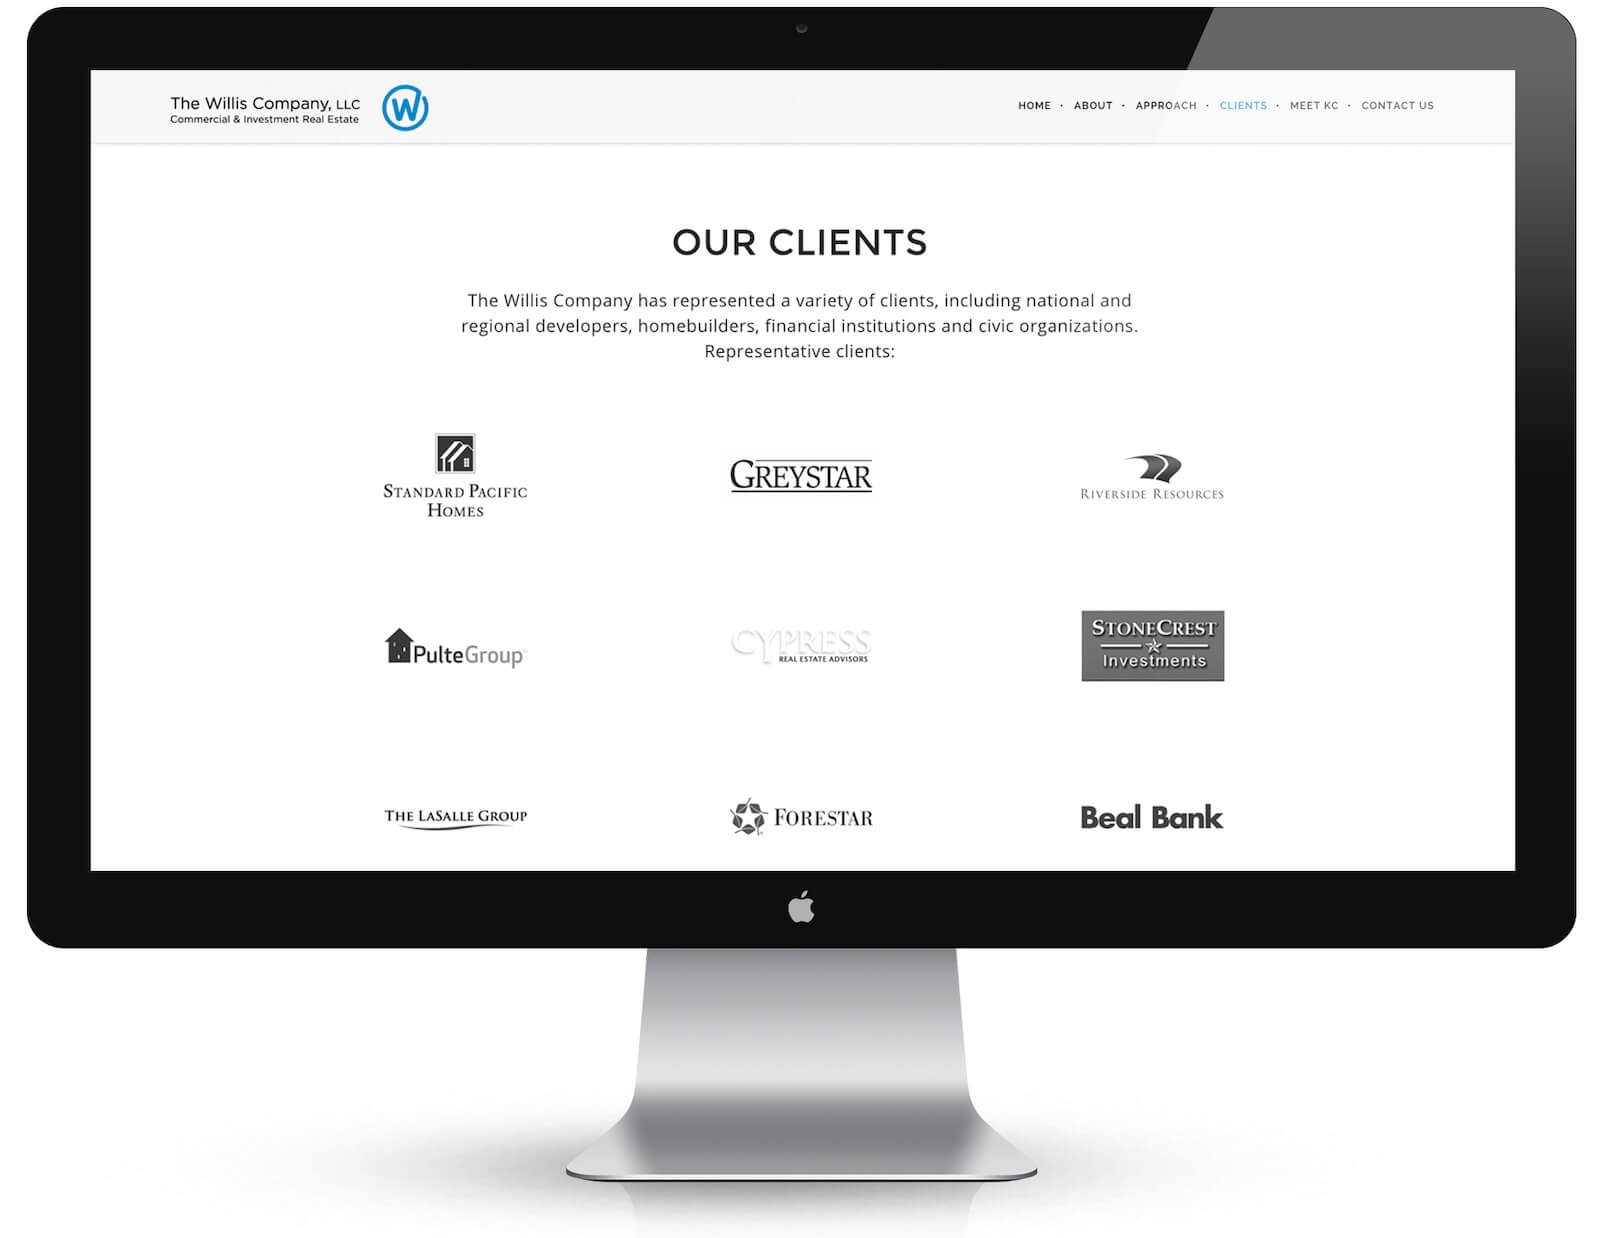 The Willis Company client page website design